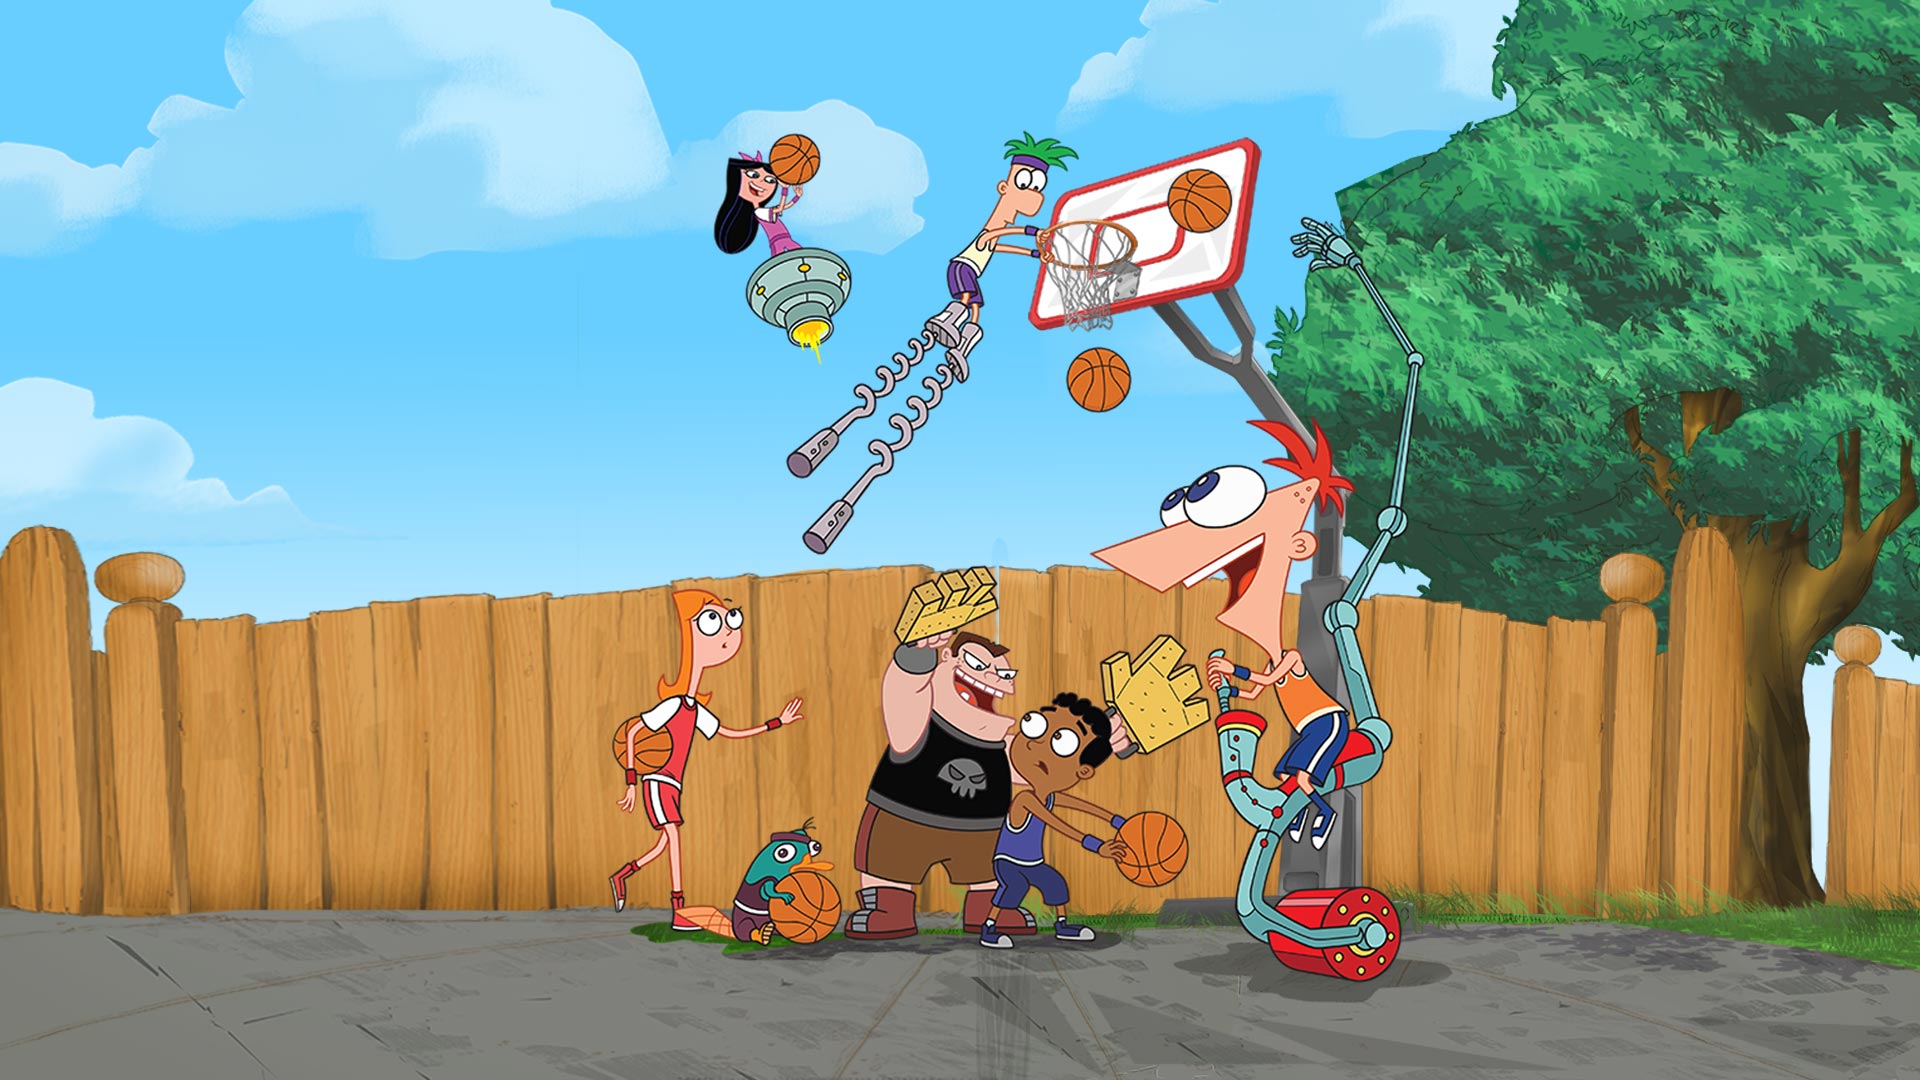 Phineas and Ferb - Disney+